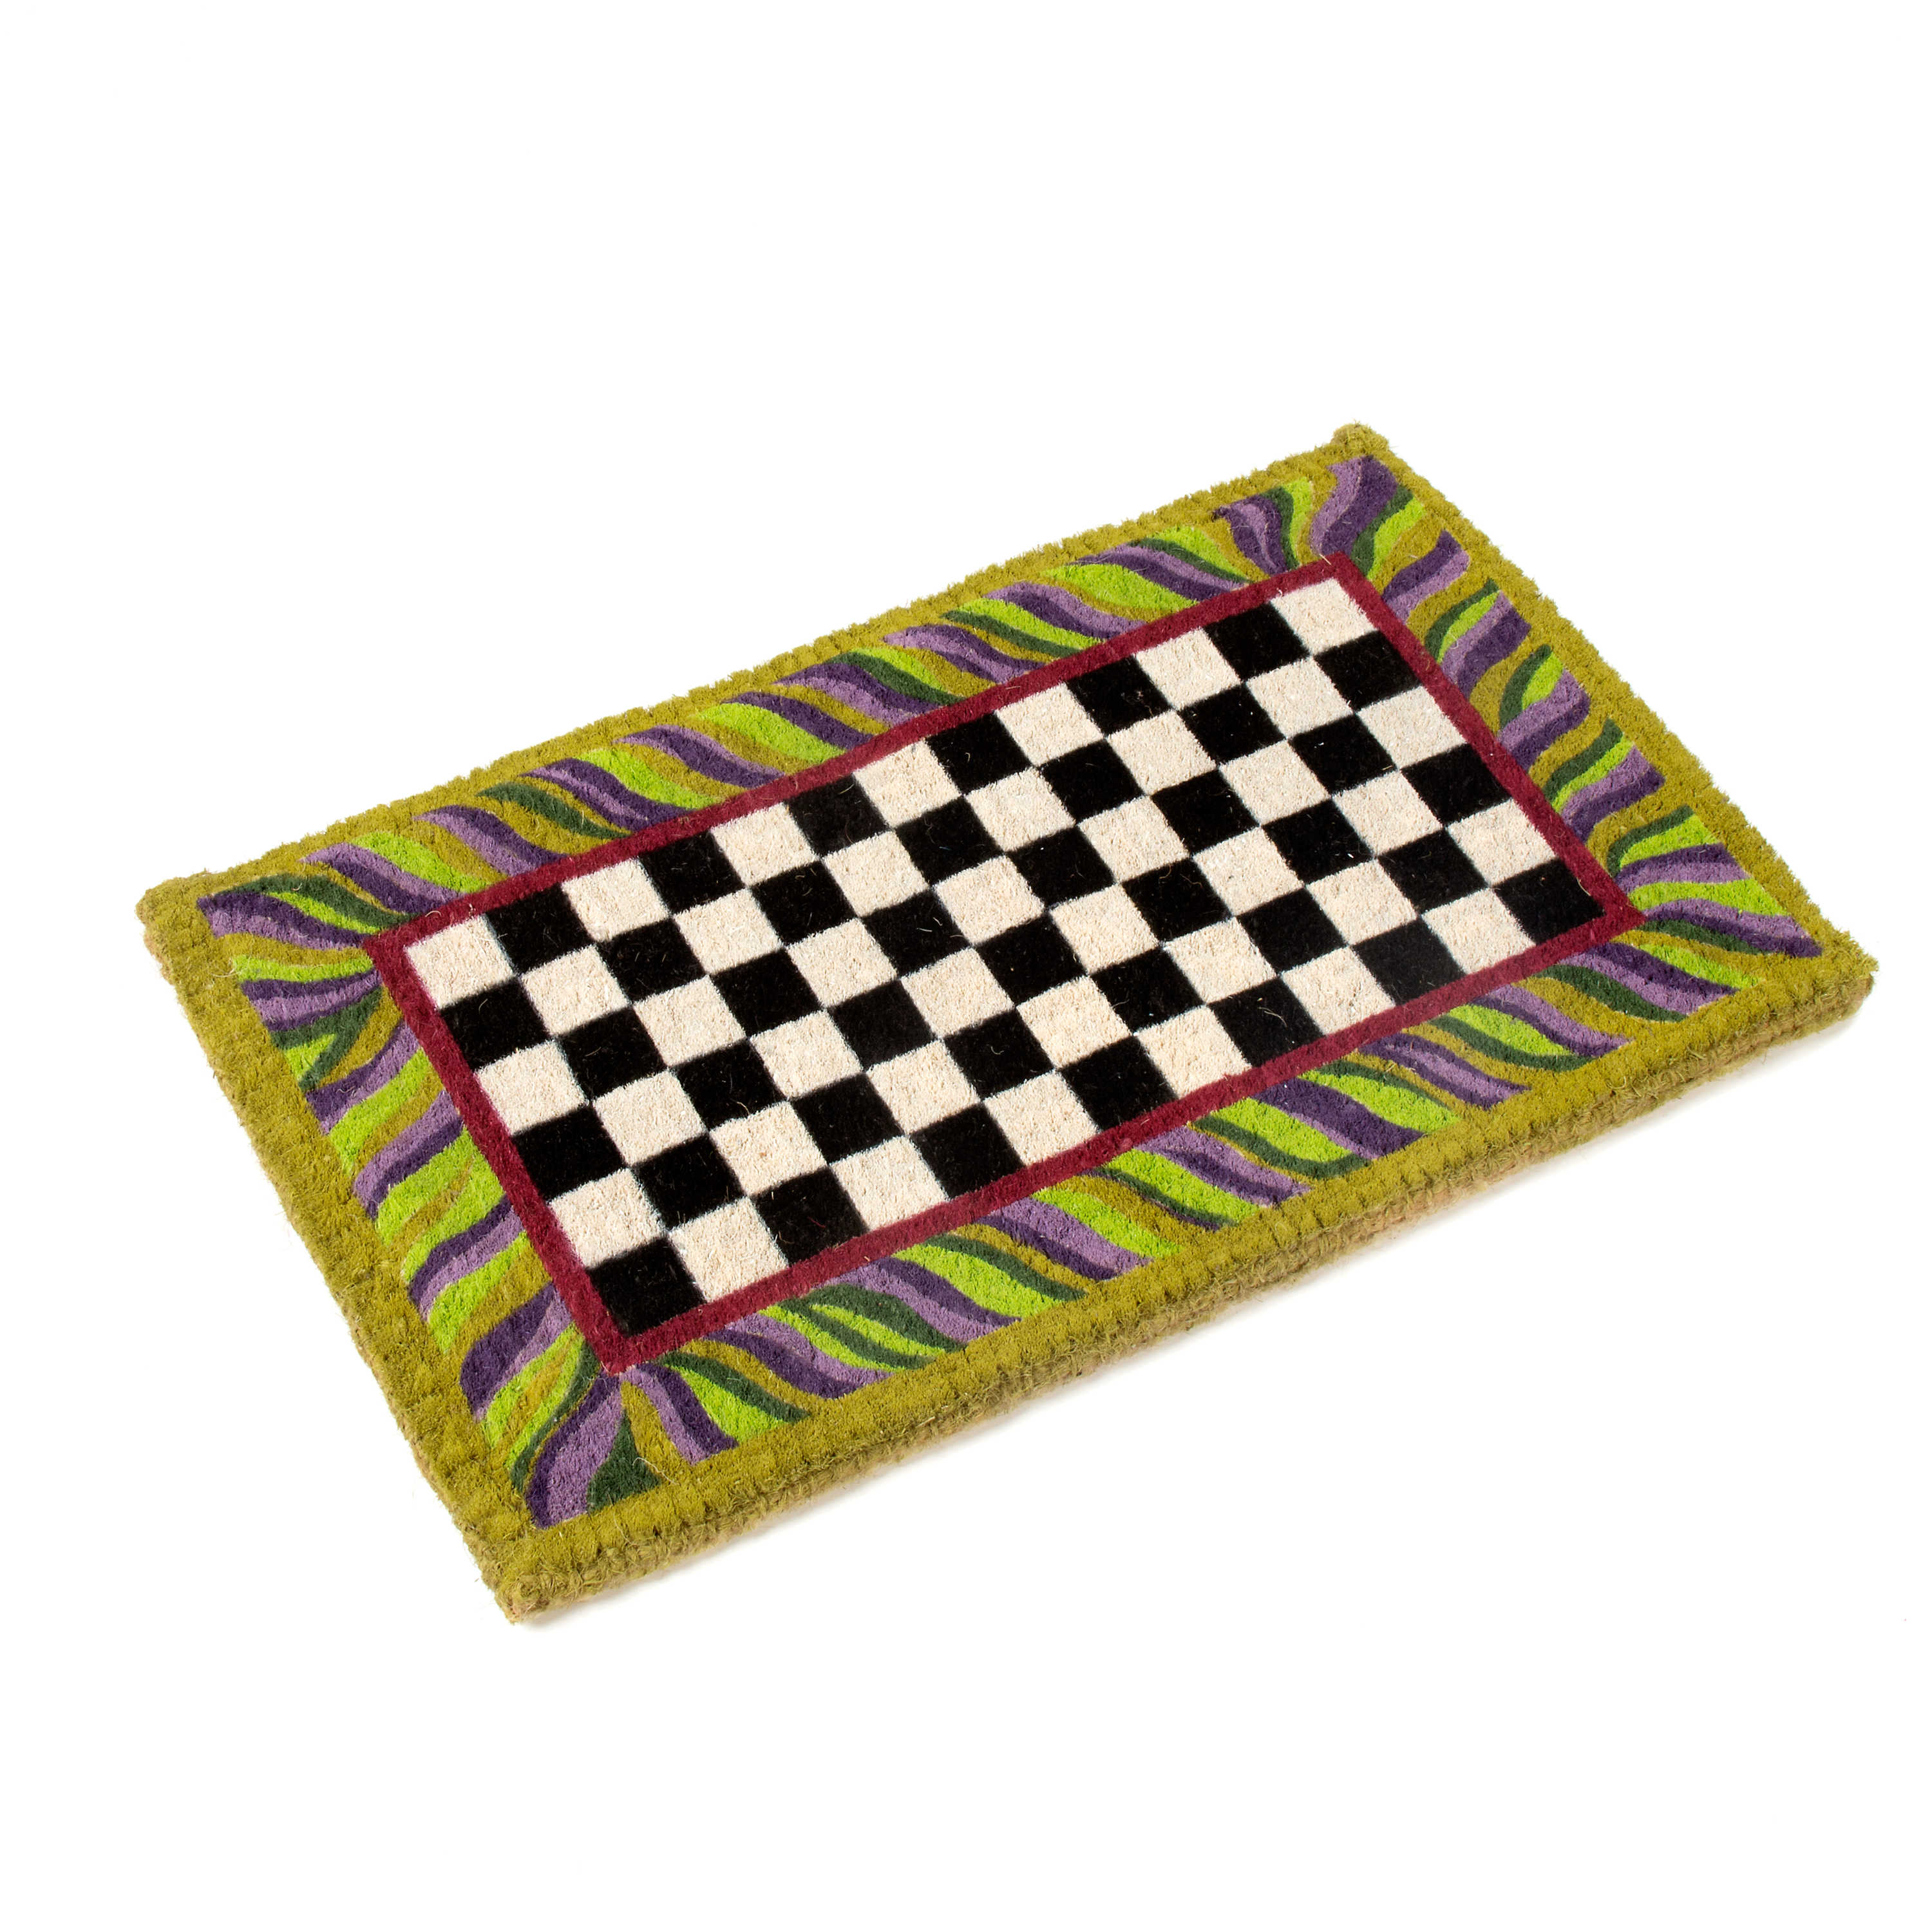 Courtly Check Entrance Mat mackenzie-childs Panama 0